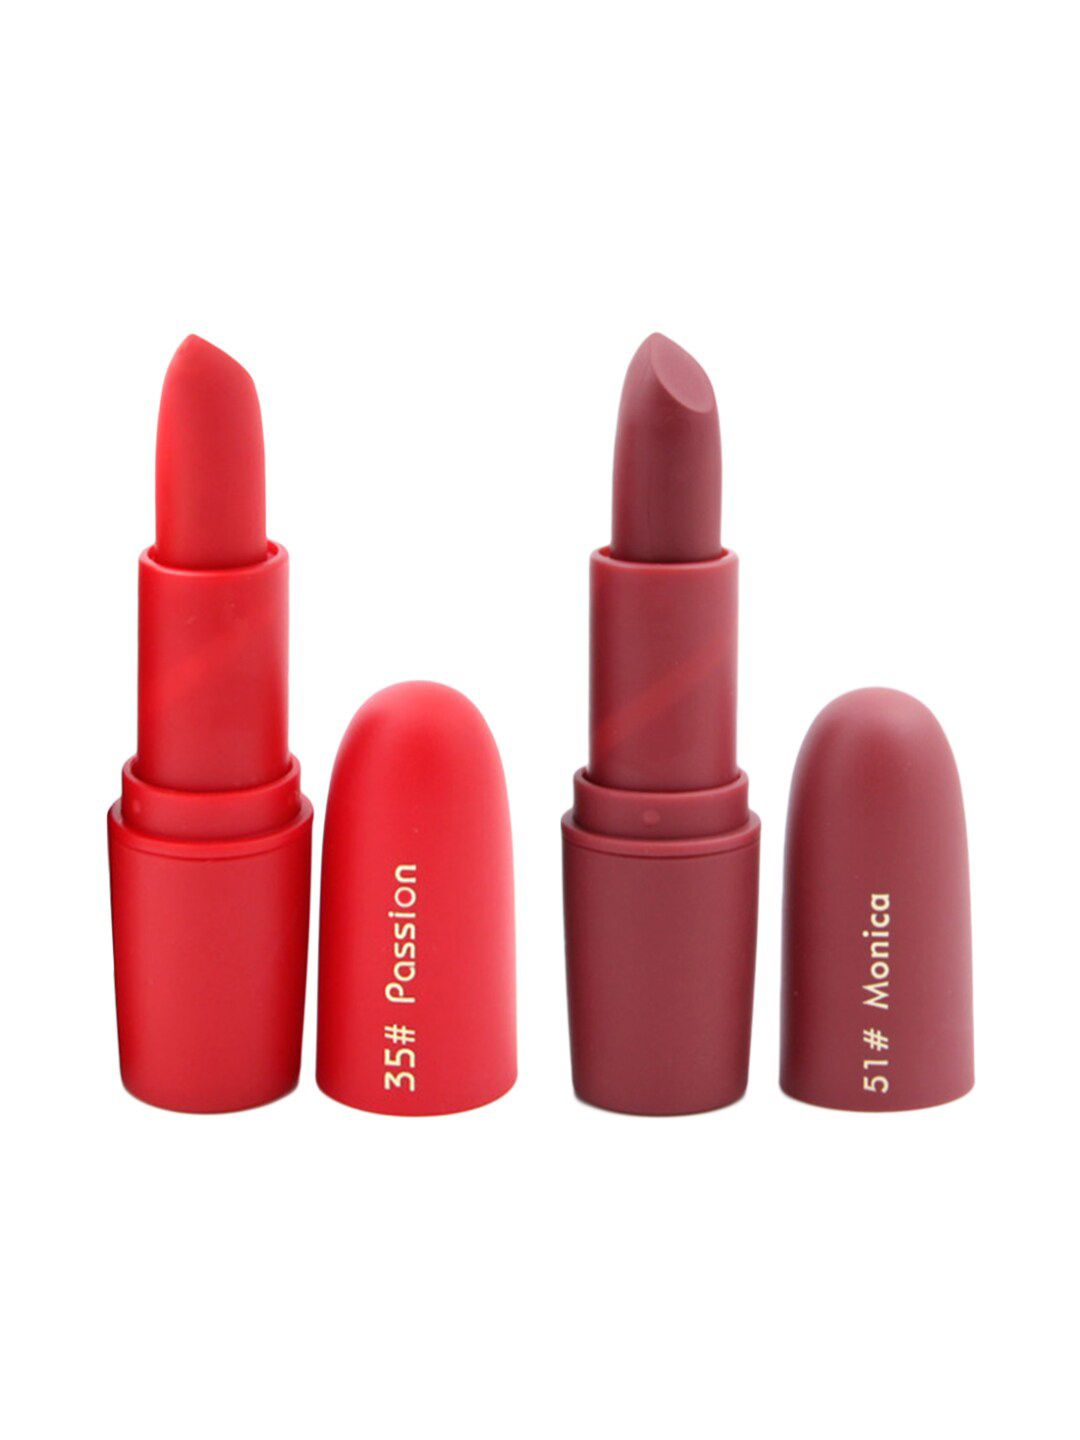 MISS ROSE Professional Make-Up Set of 2 Matte Creamy Lipsticks - Passion 35 & Monica 51 Price in India